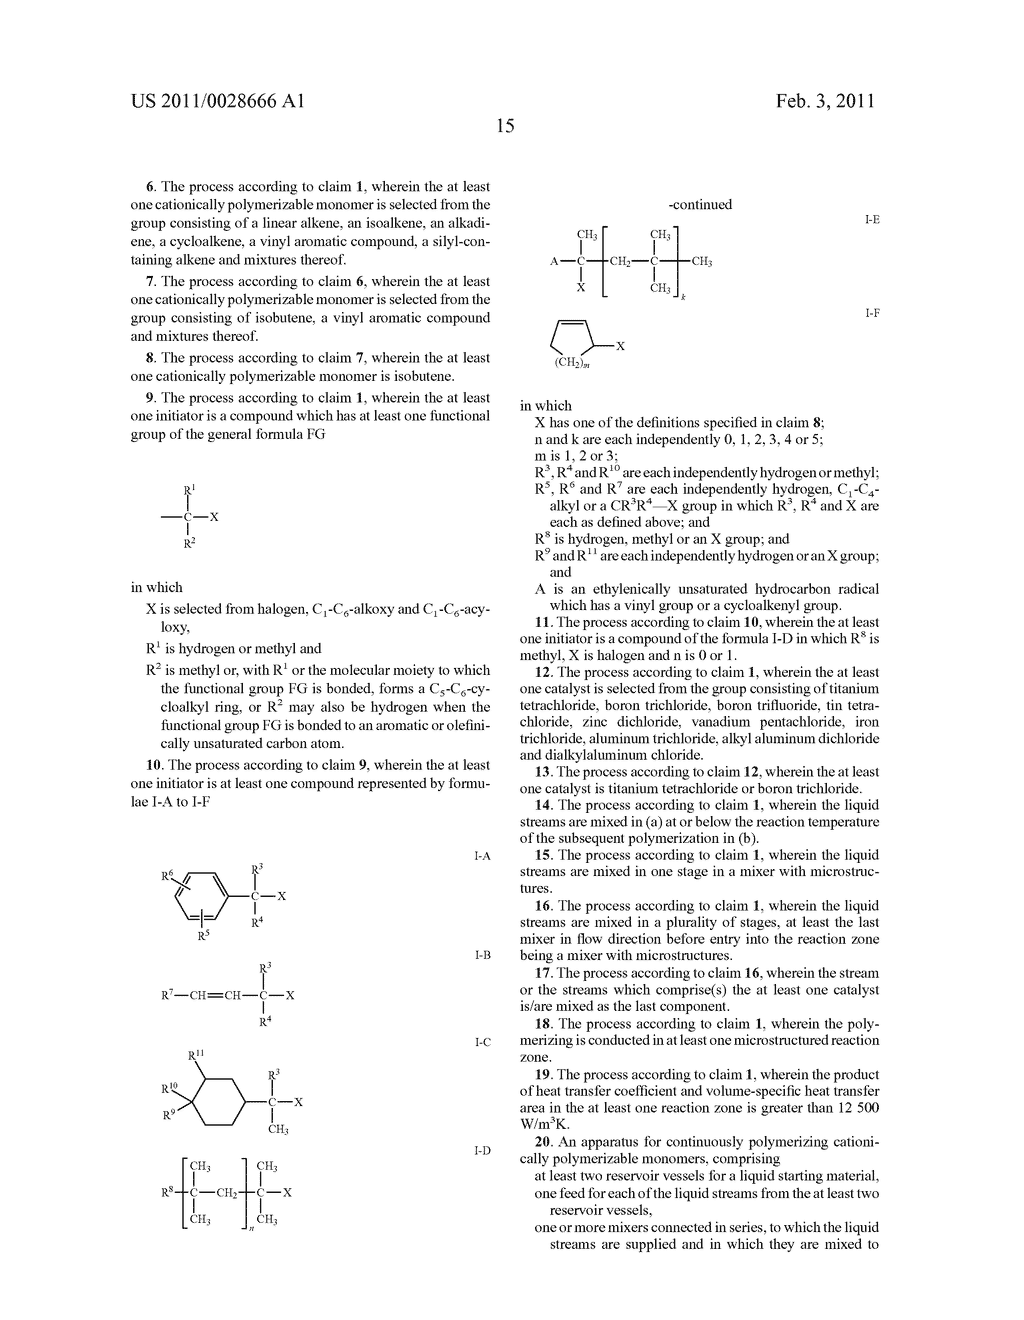 PROCESS AND APPARATUS FOR CONTINUOUSLY POLYMERIZING CATIONICALLY POLYMERIZABLE MONOMERS - diagram, schematic, and image 17